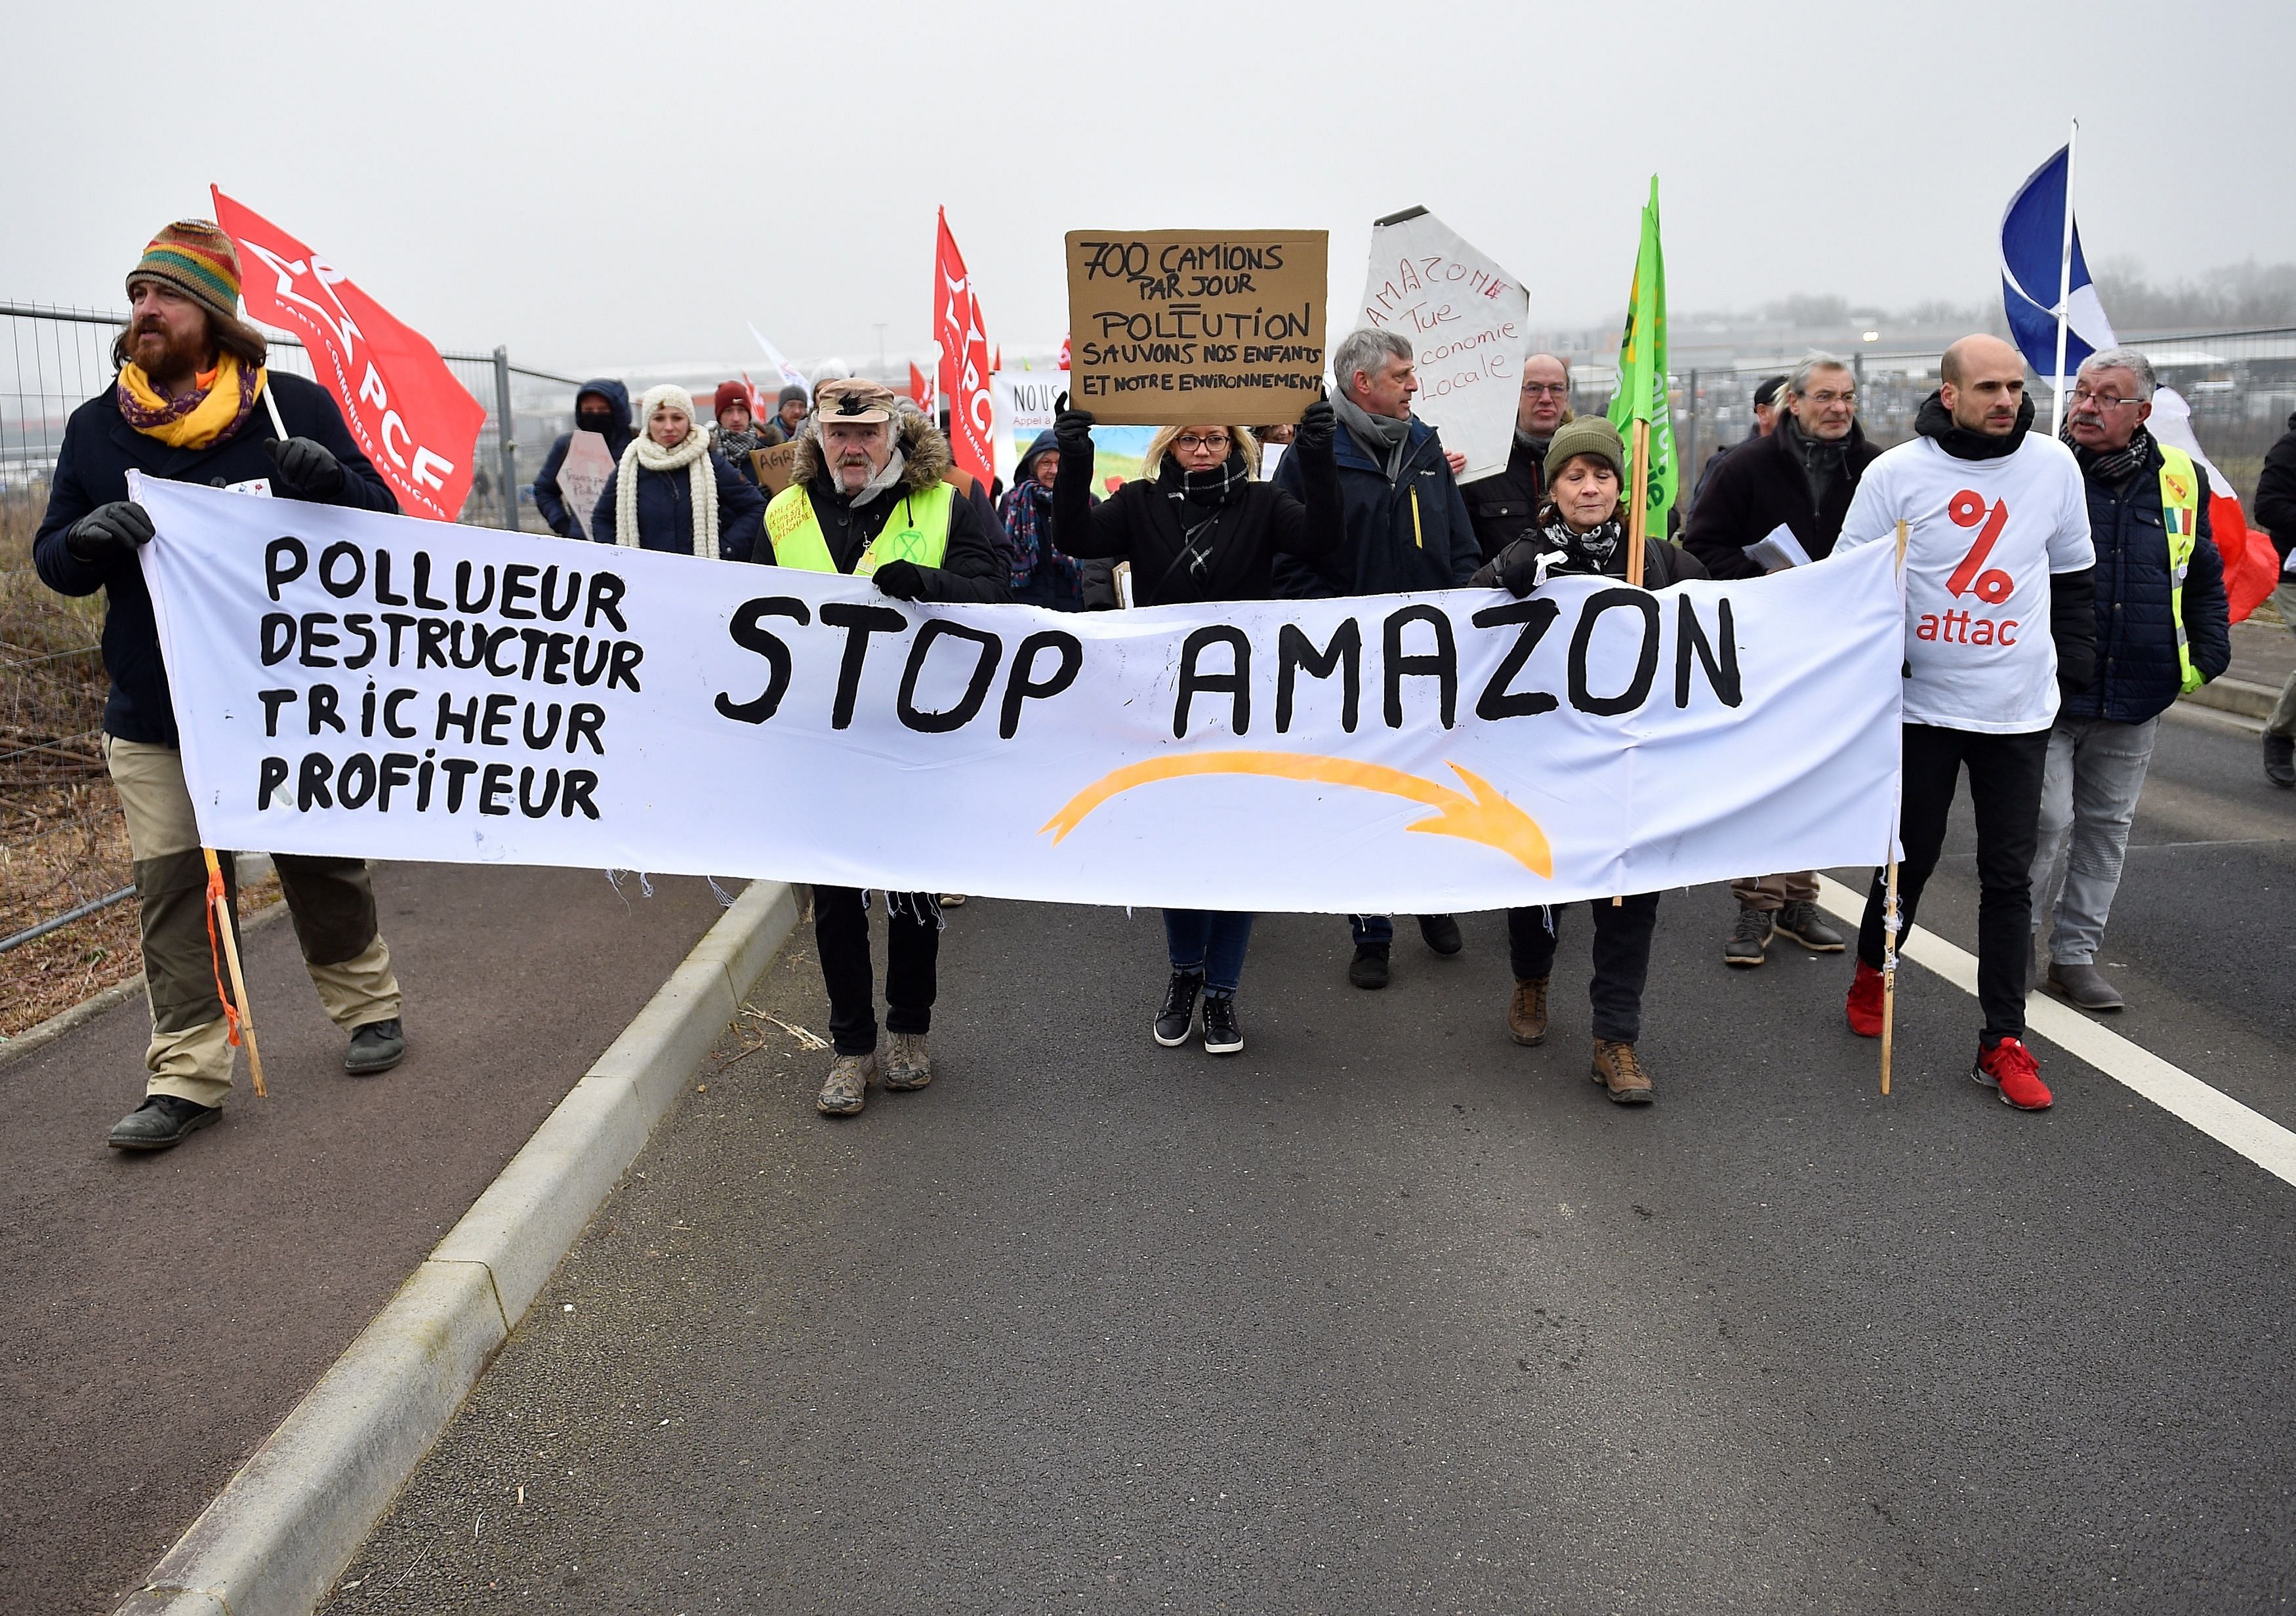 Protesters hold banners and placards during a demonstration against the installation of a warehouse of the online retailer Amazon on the former military air base of Frescaty. (AFP Photo)